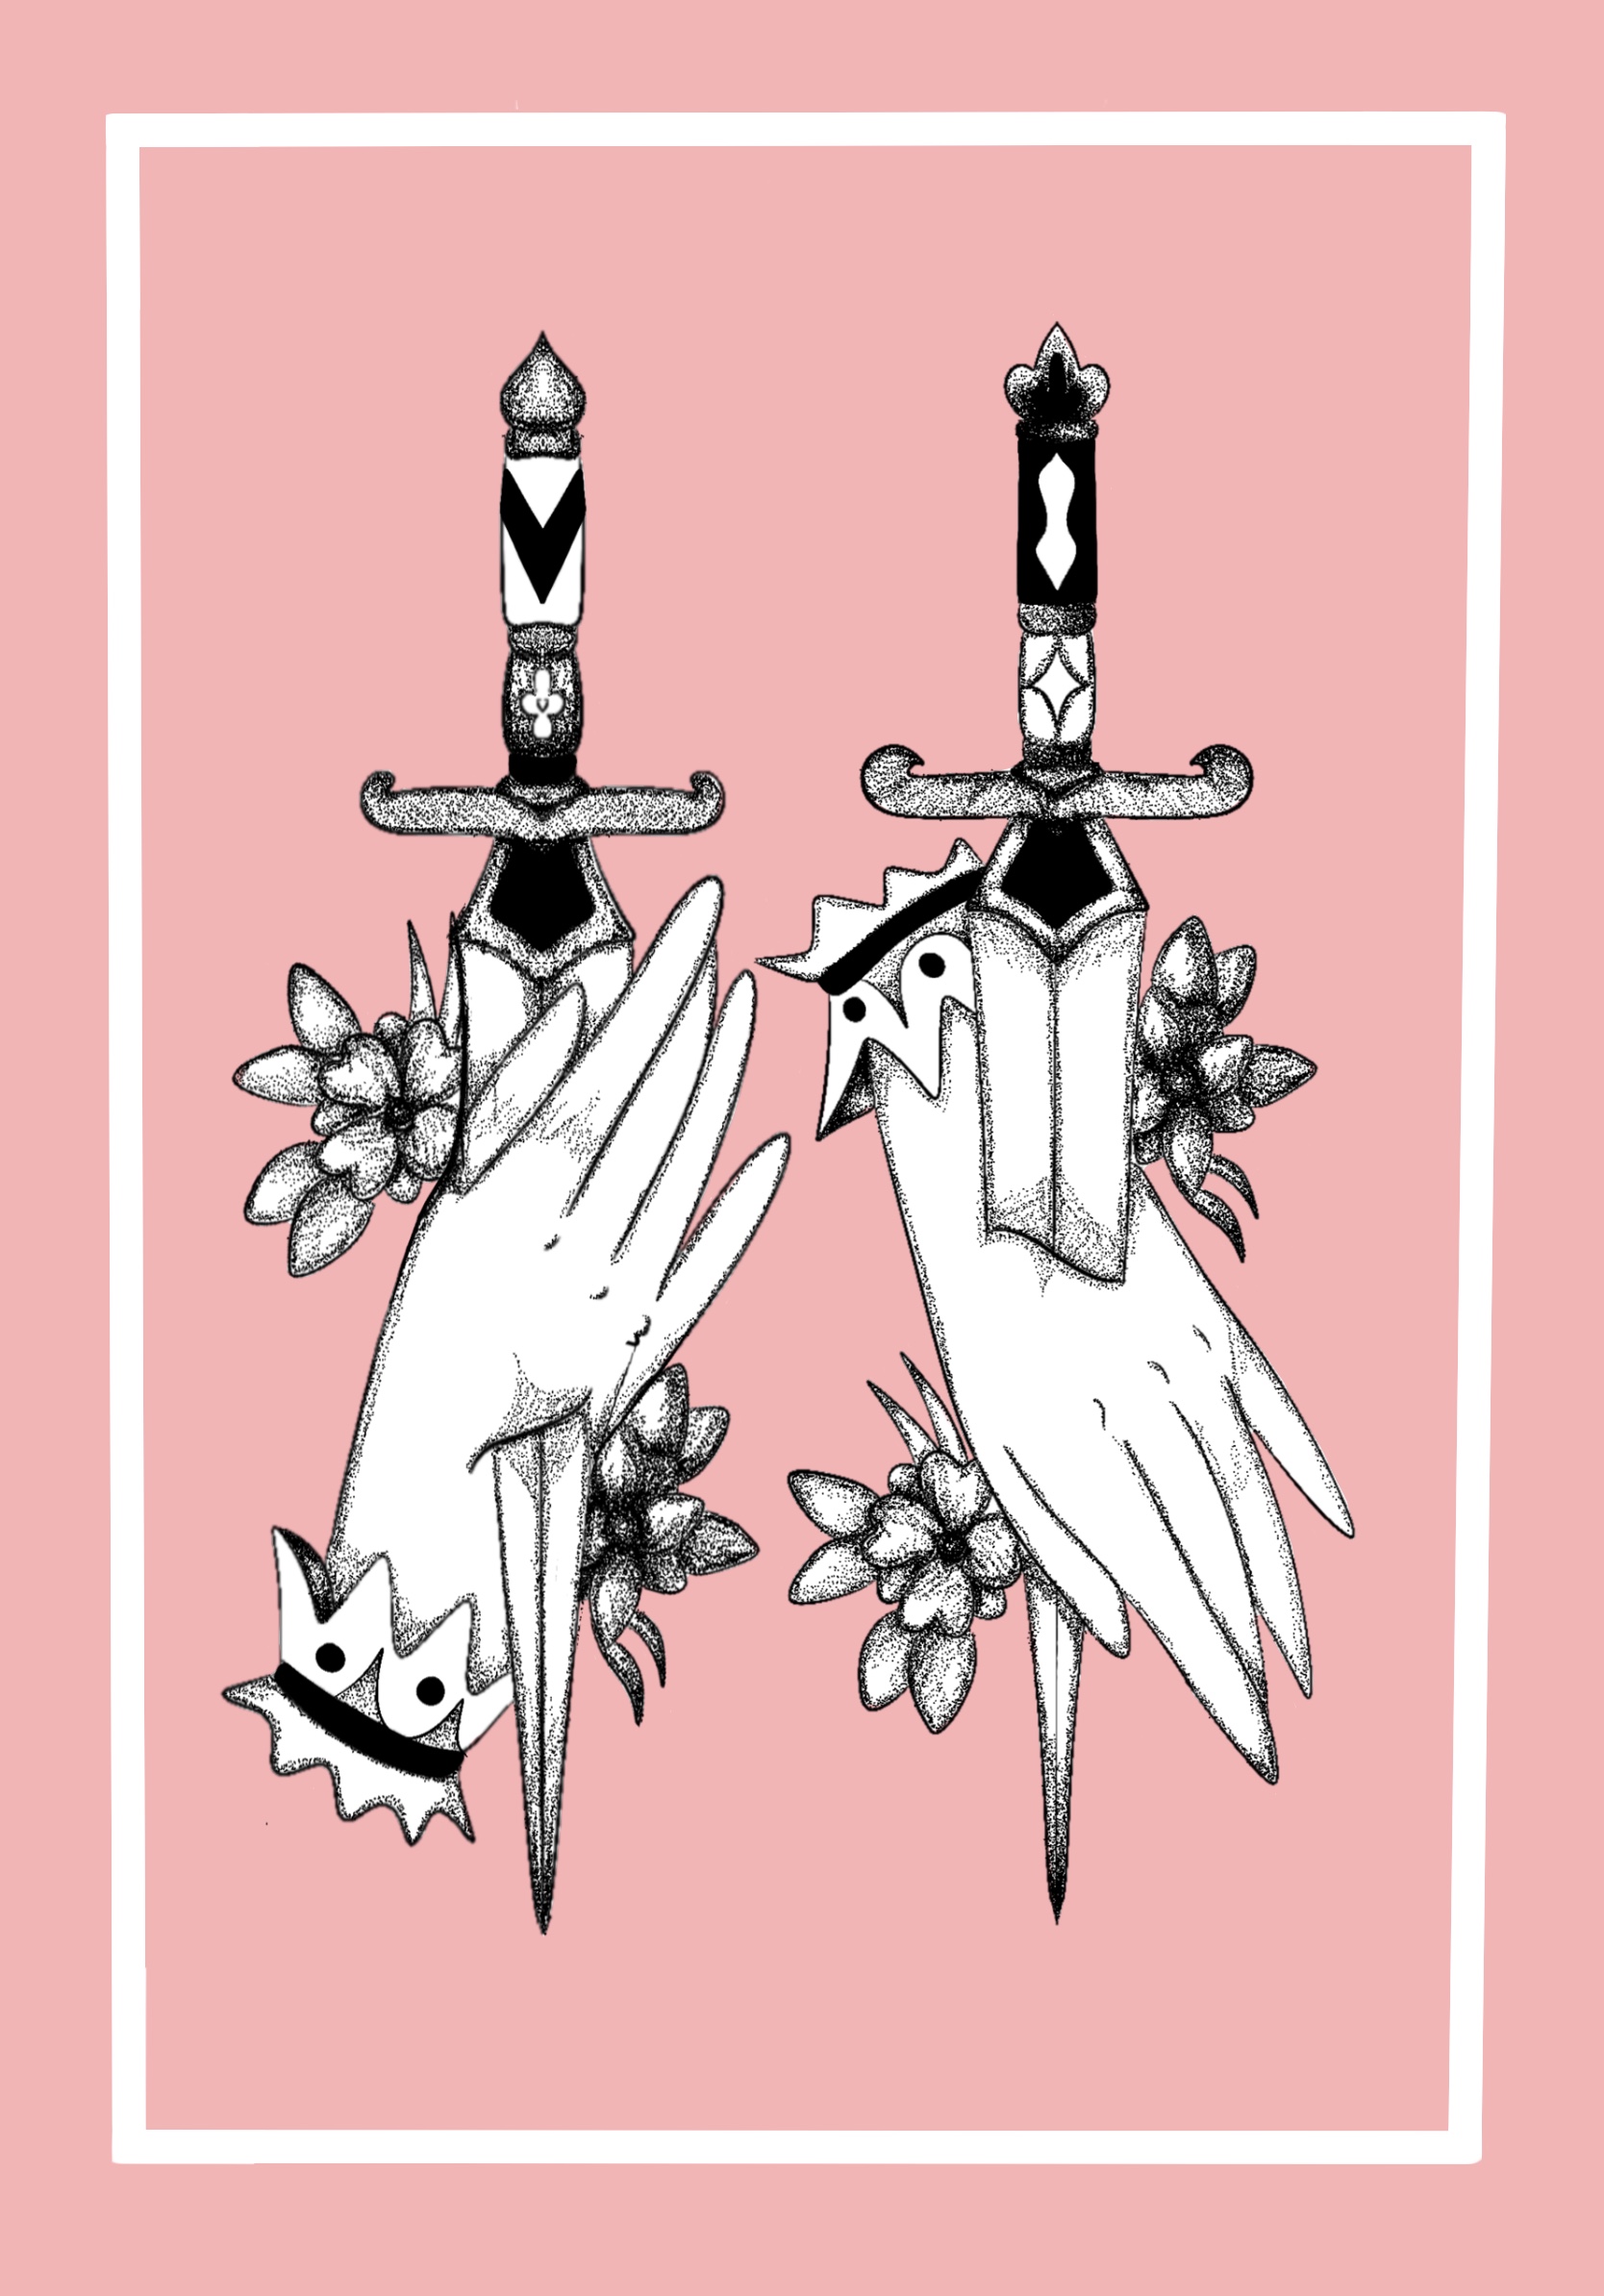 BA Illustration work by Mia Sains showing dot work tattoo pieces of hands with a dagger through the centre, against a pink background